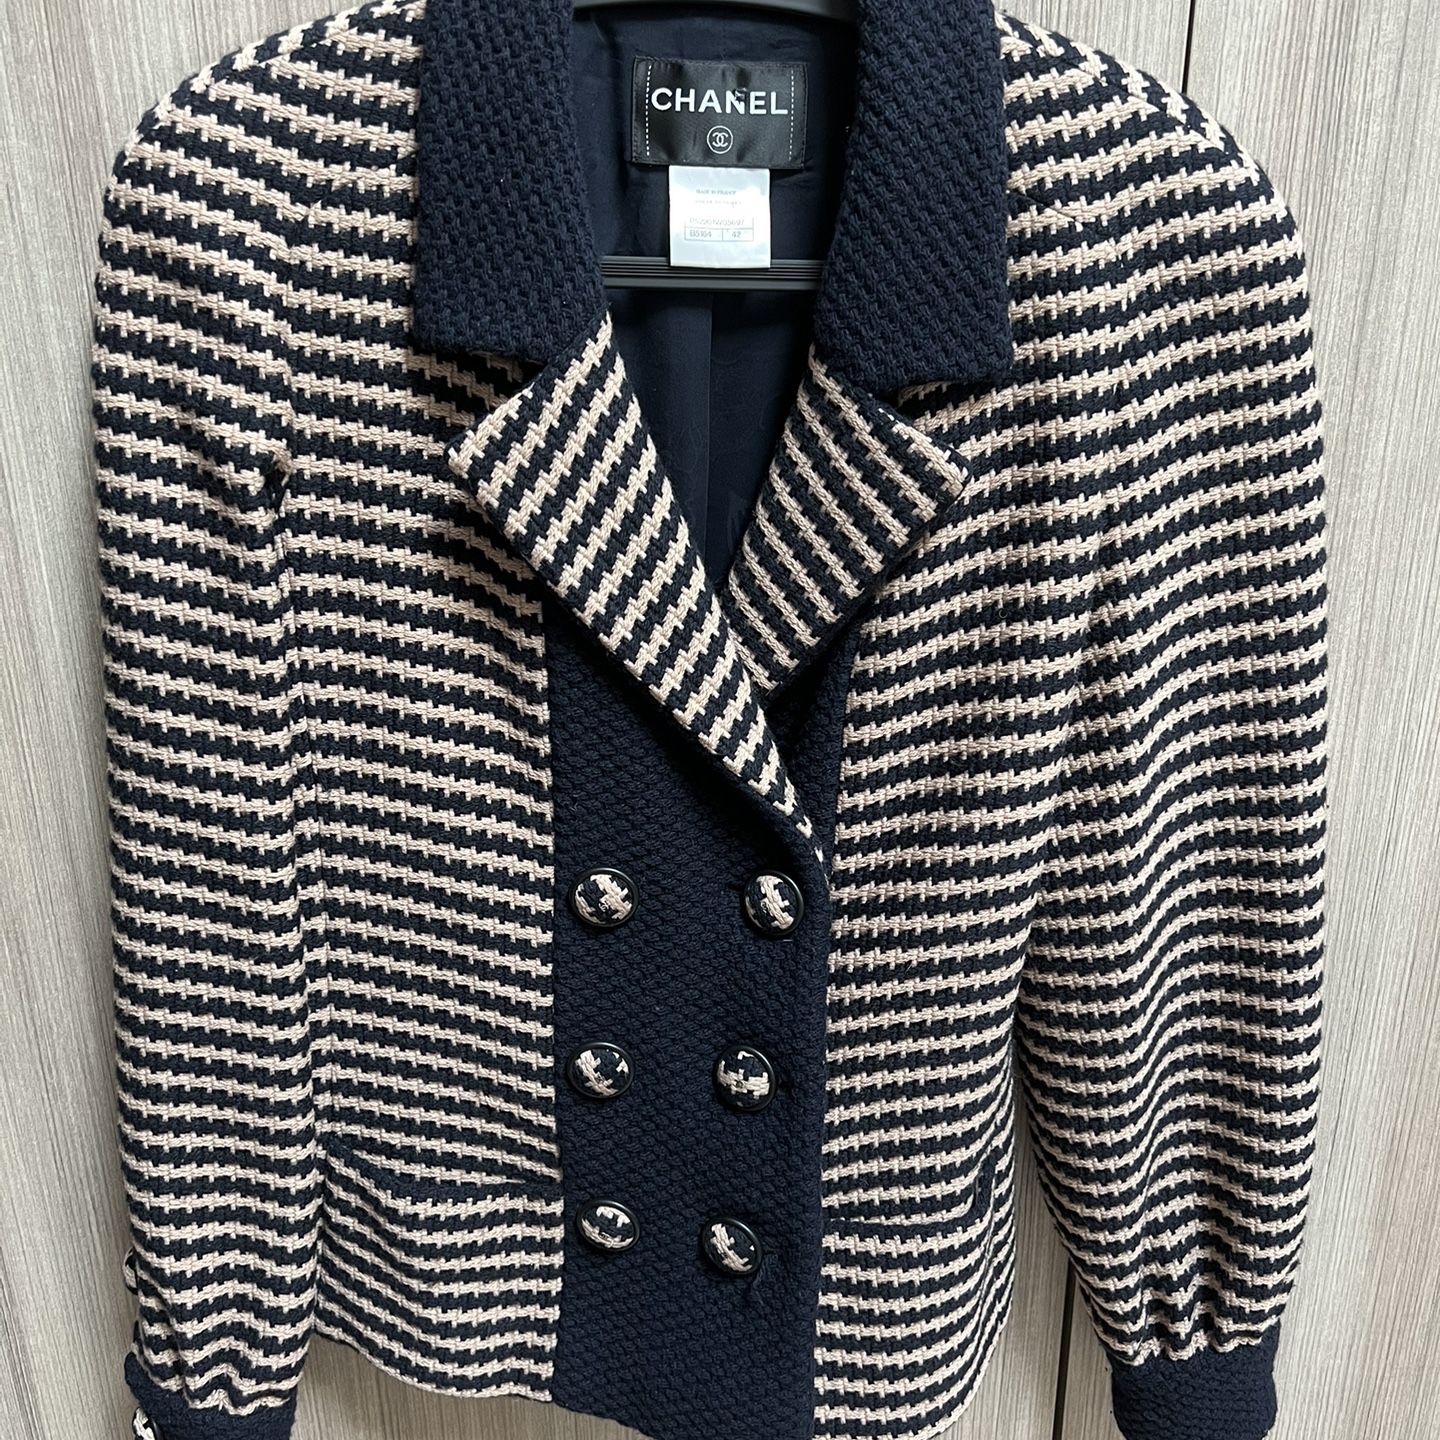 CHANEL WOOL JACKET for Sale in West Hollywood, CA - OfferUp